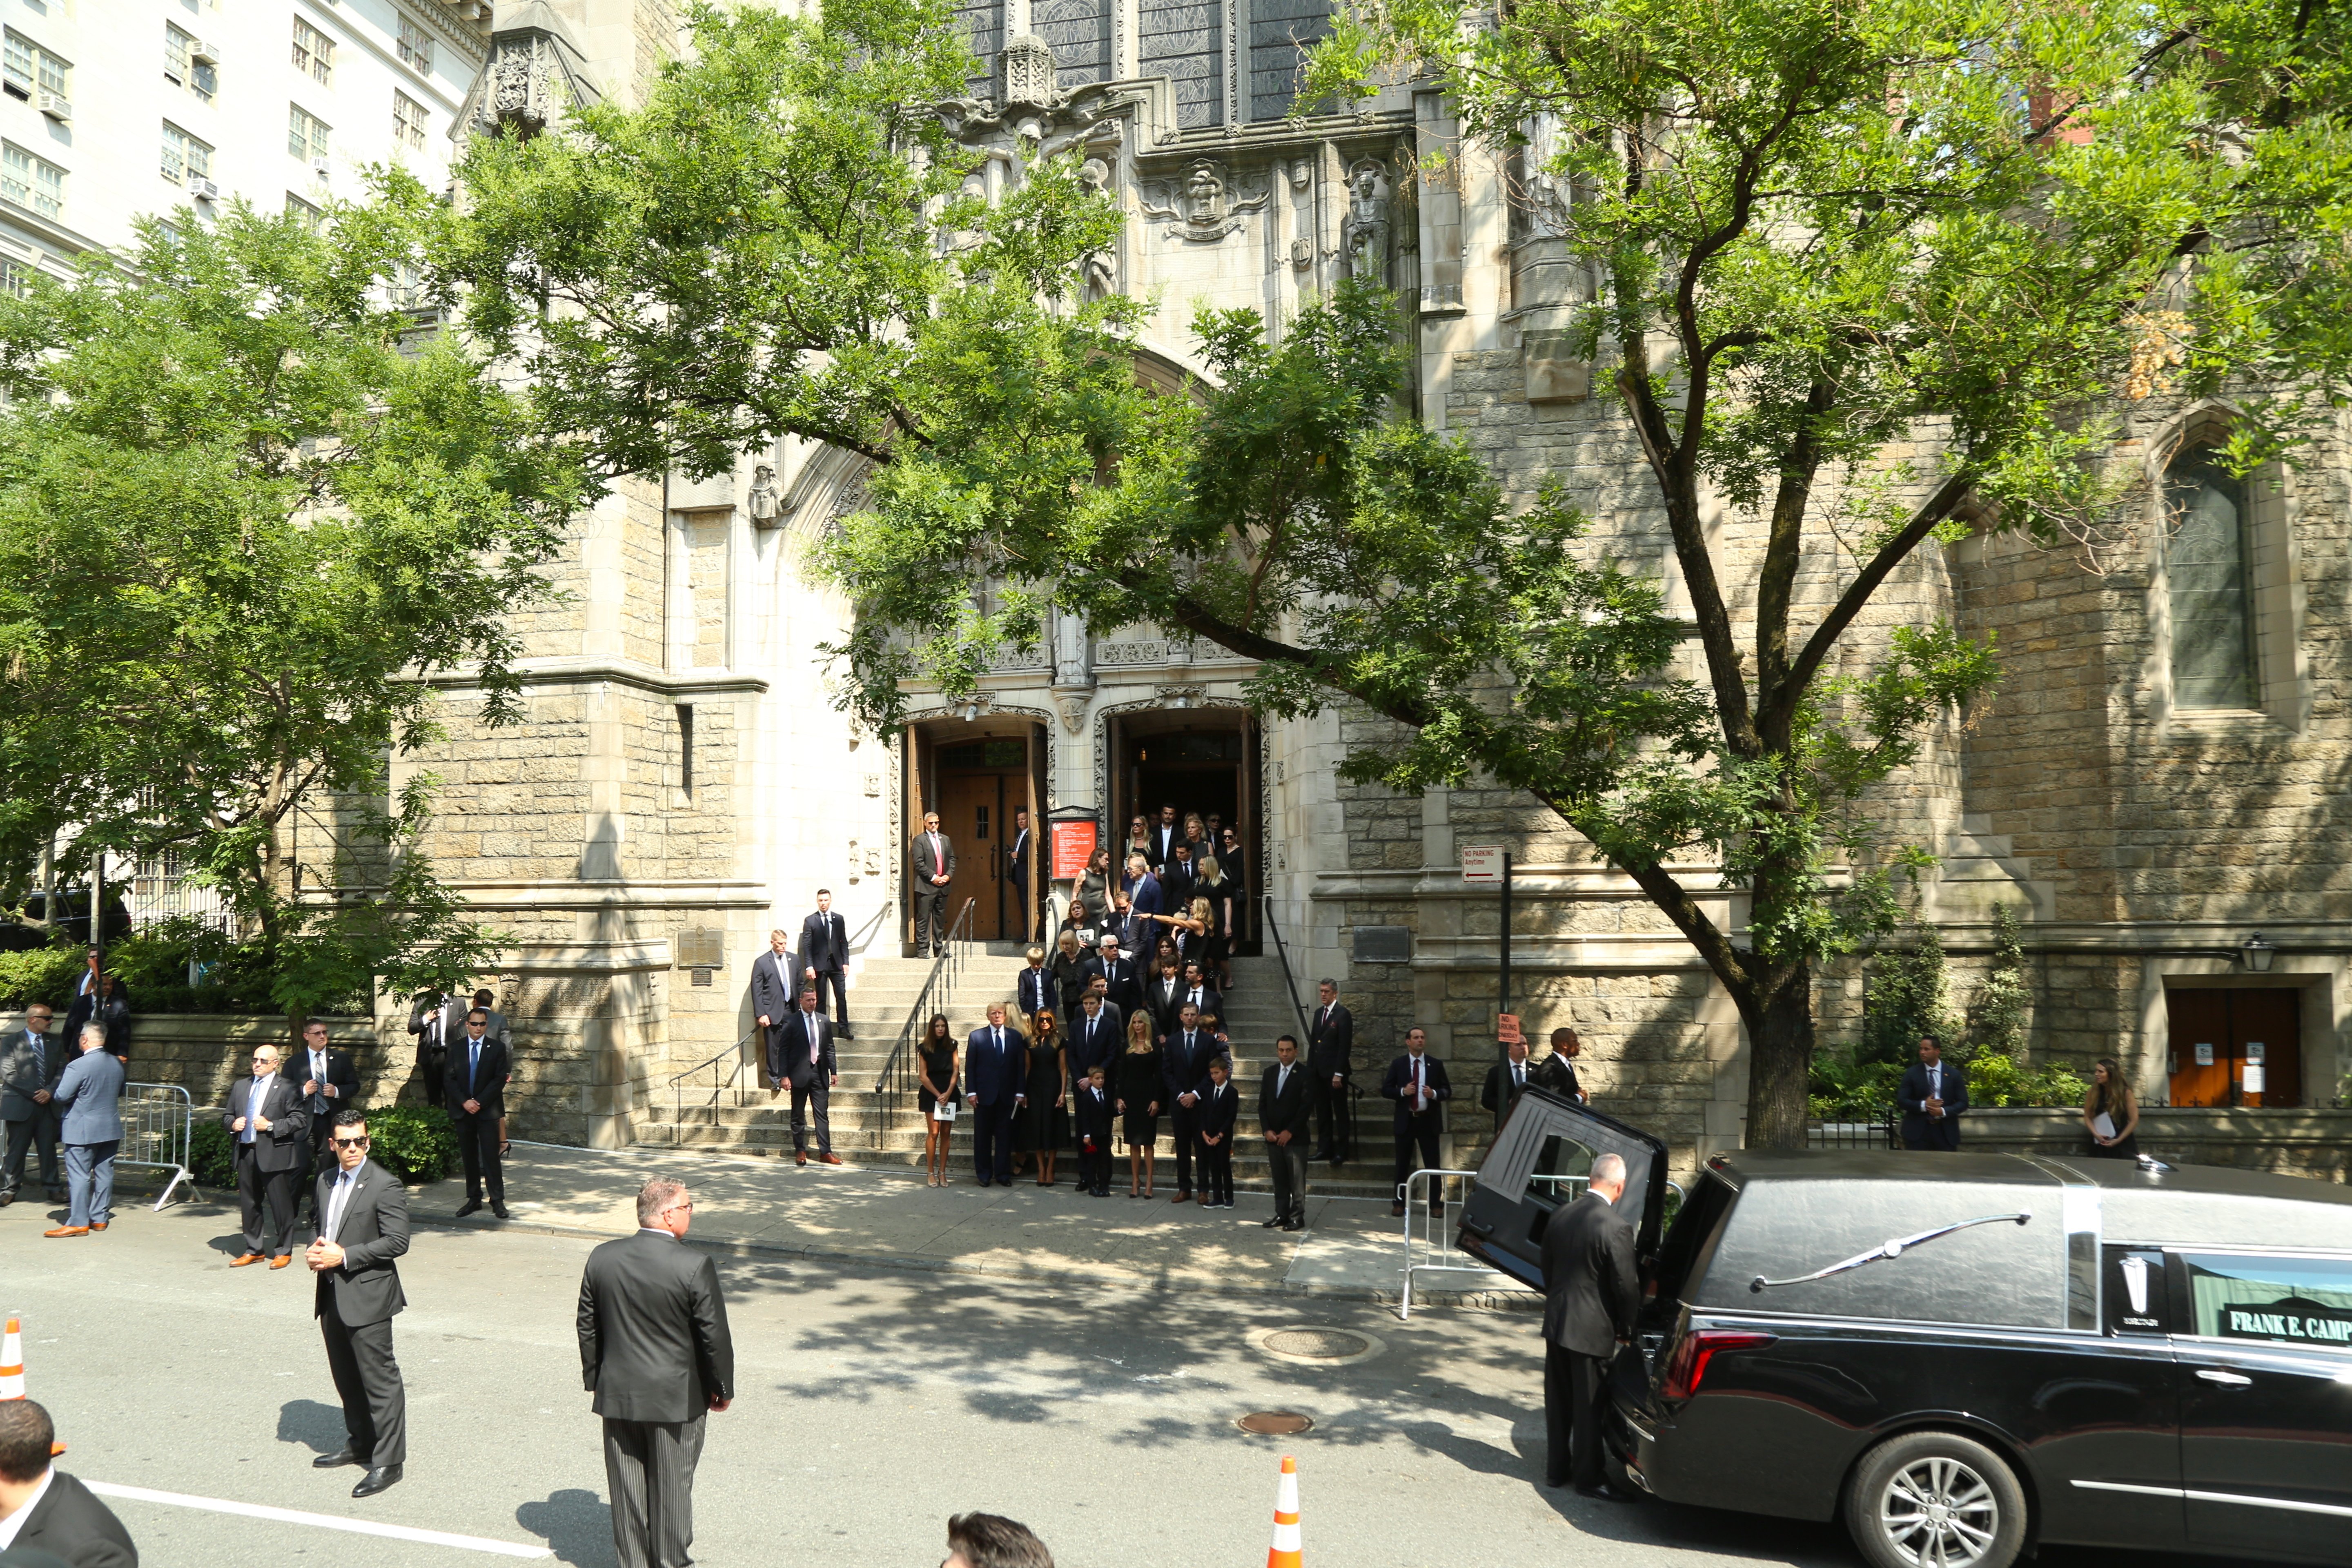 A photo showing the coffin of Ivana Trump carried out from St Vincent Ferrer Roman Catholic Church during her funeral service on July 20, 2022 in New York.┃Source: Getty Images